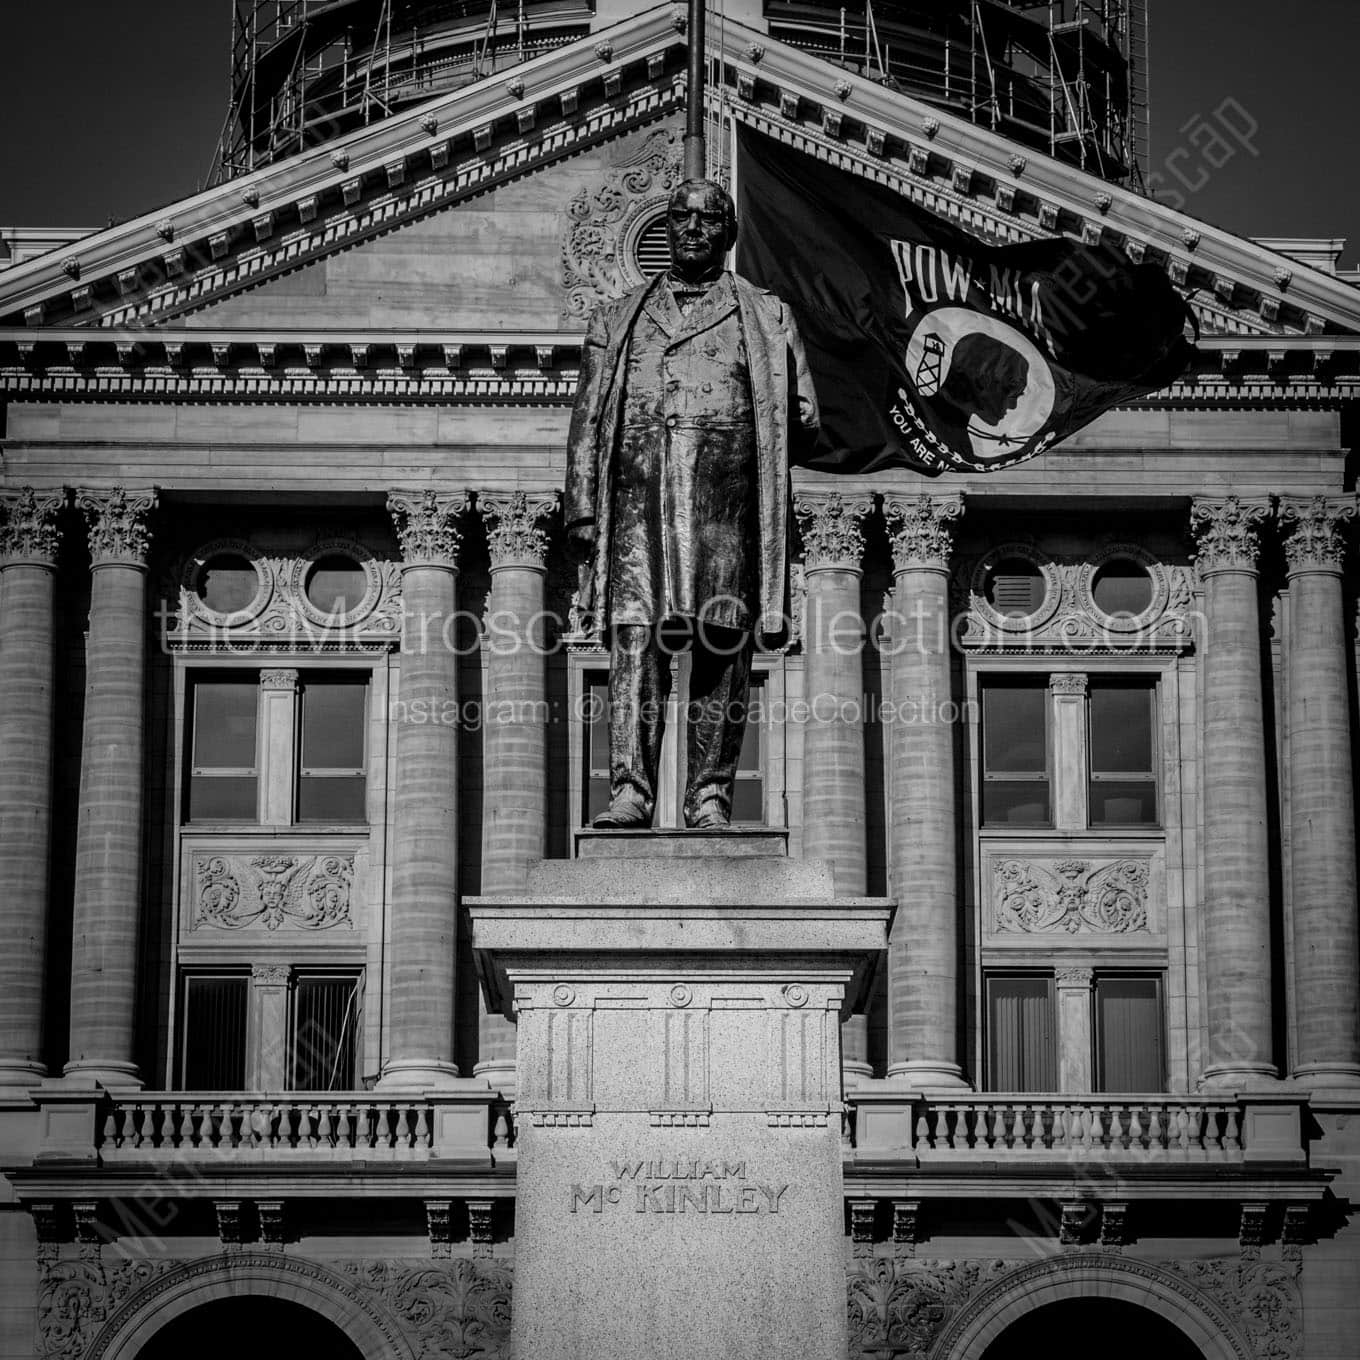 lucas county courthouse mckinley monument Black & White Office Art